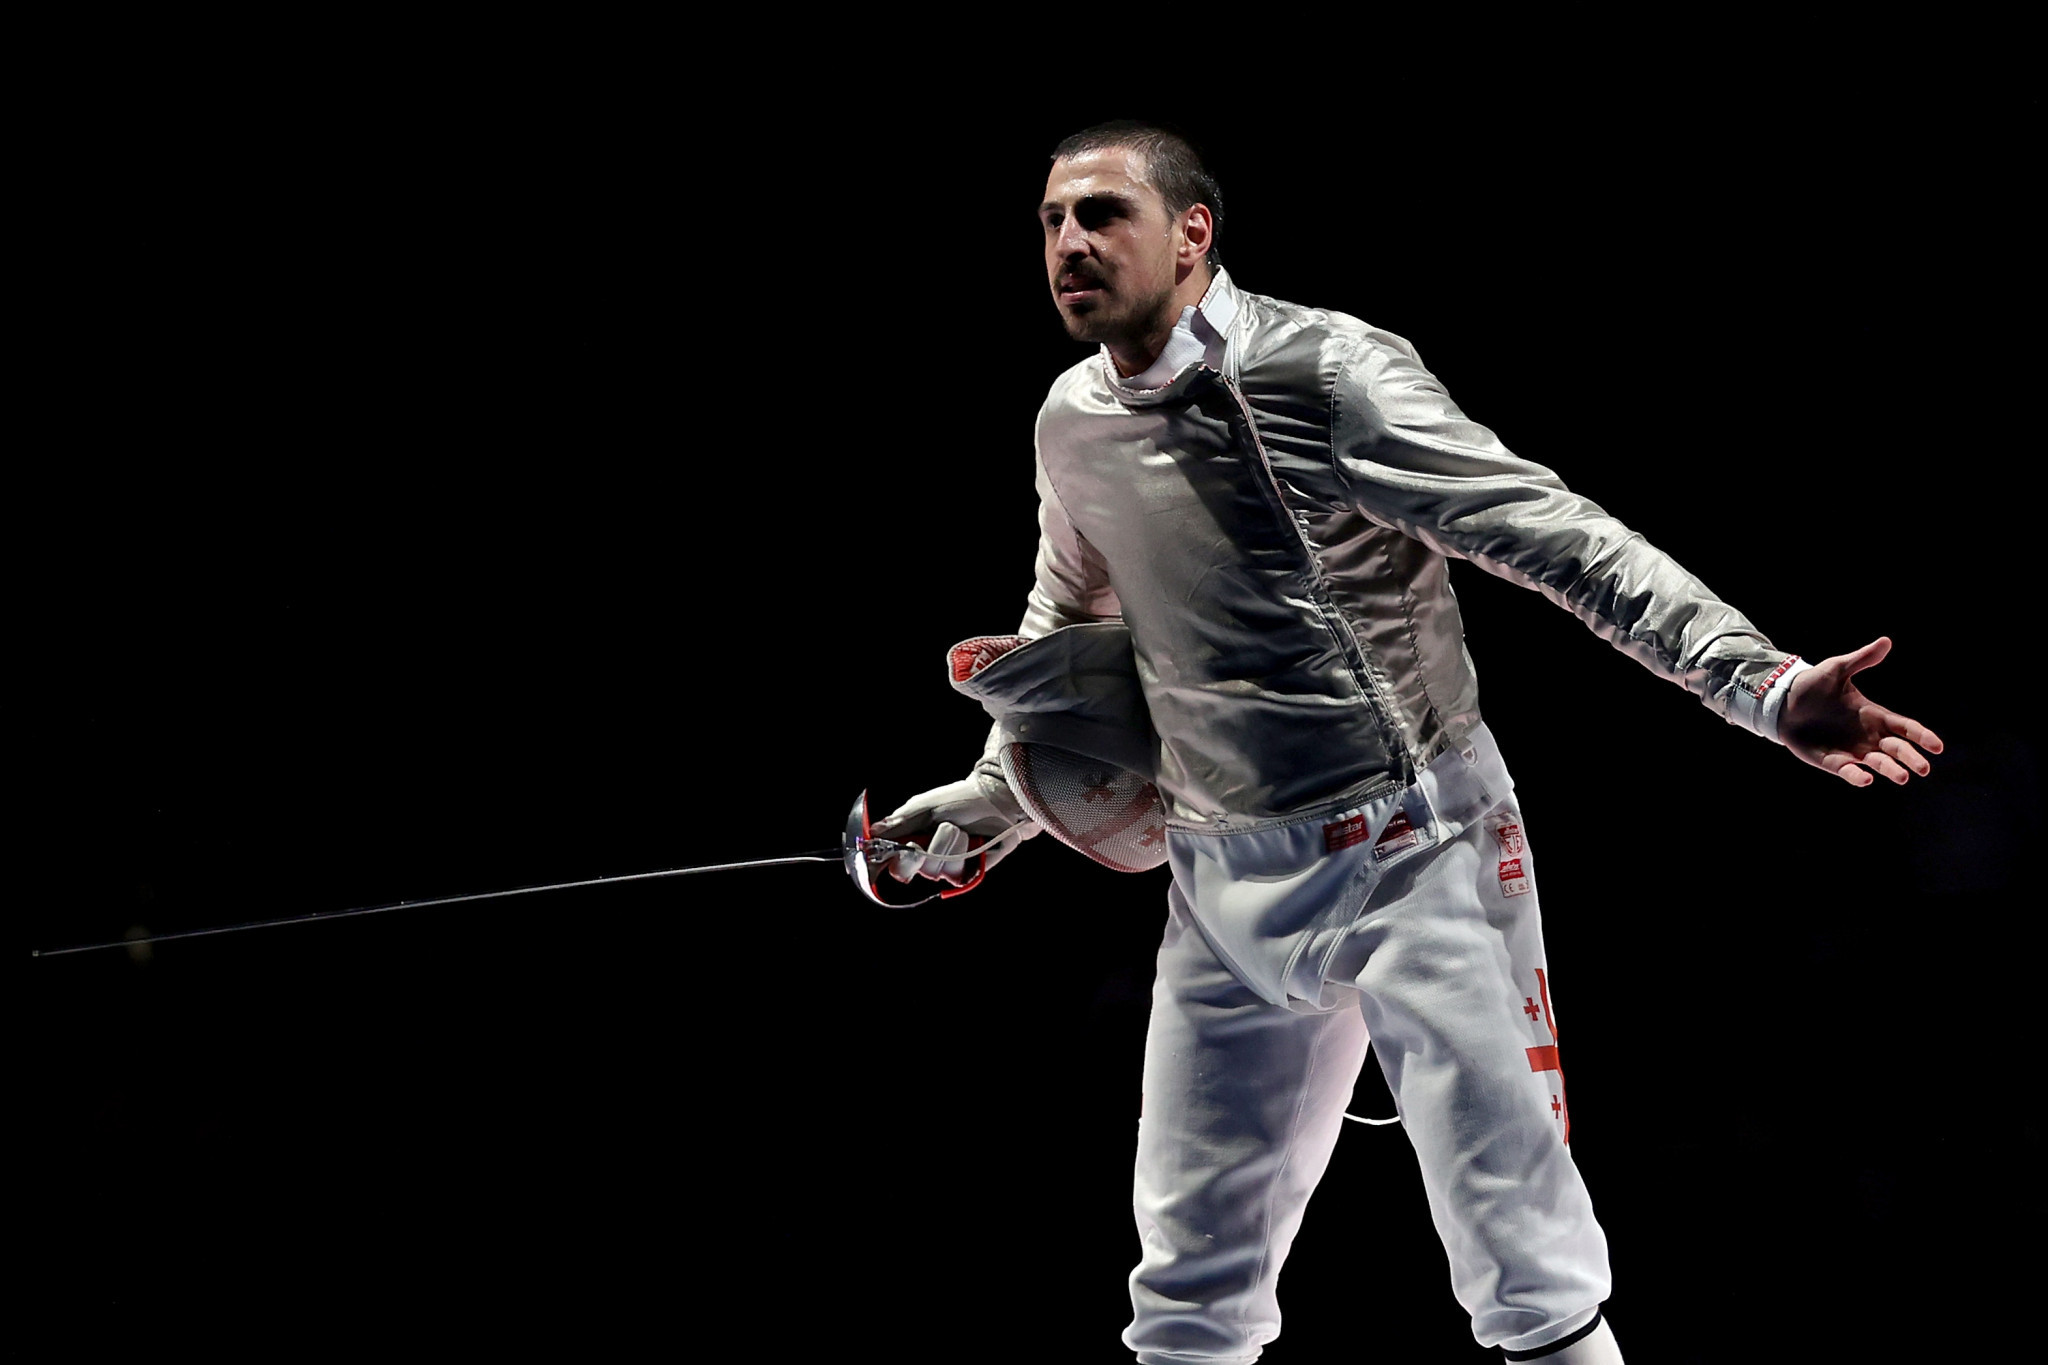 Sandro Bazadze of Georgia claimed gold in the men's sabre event ©Getty Images